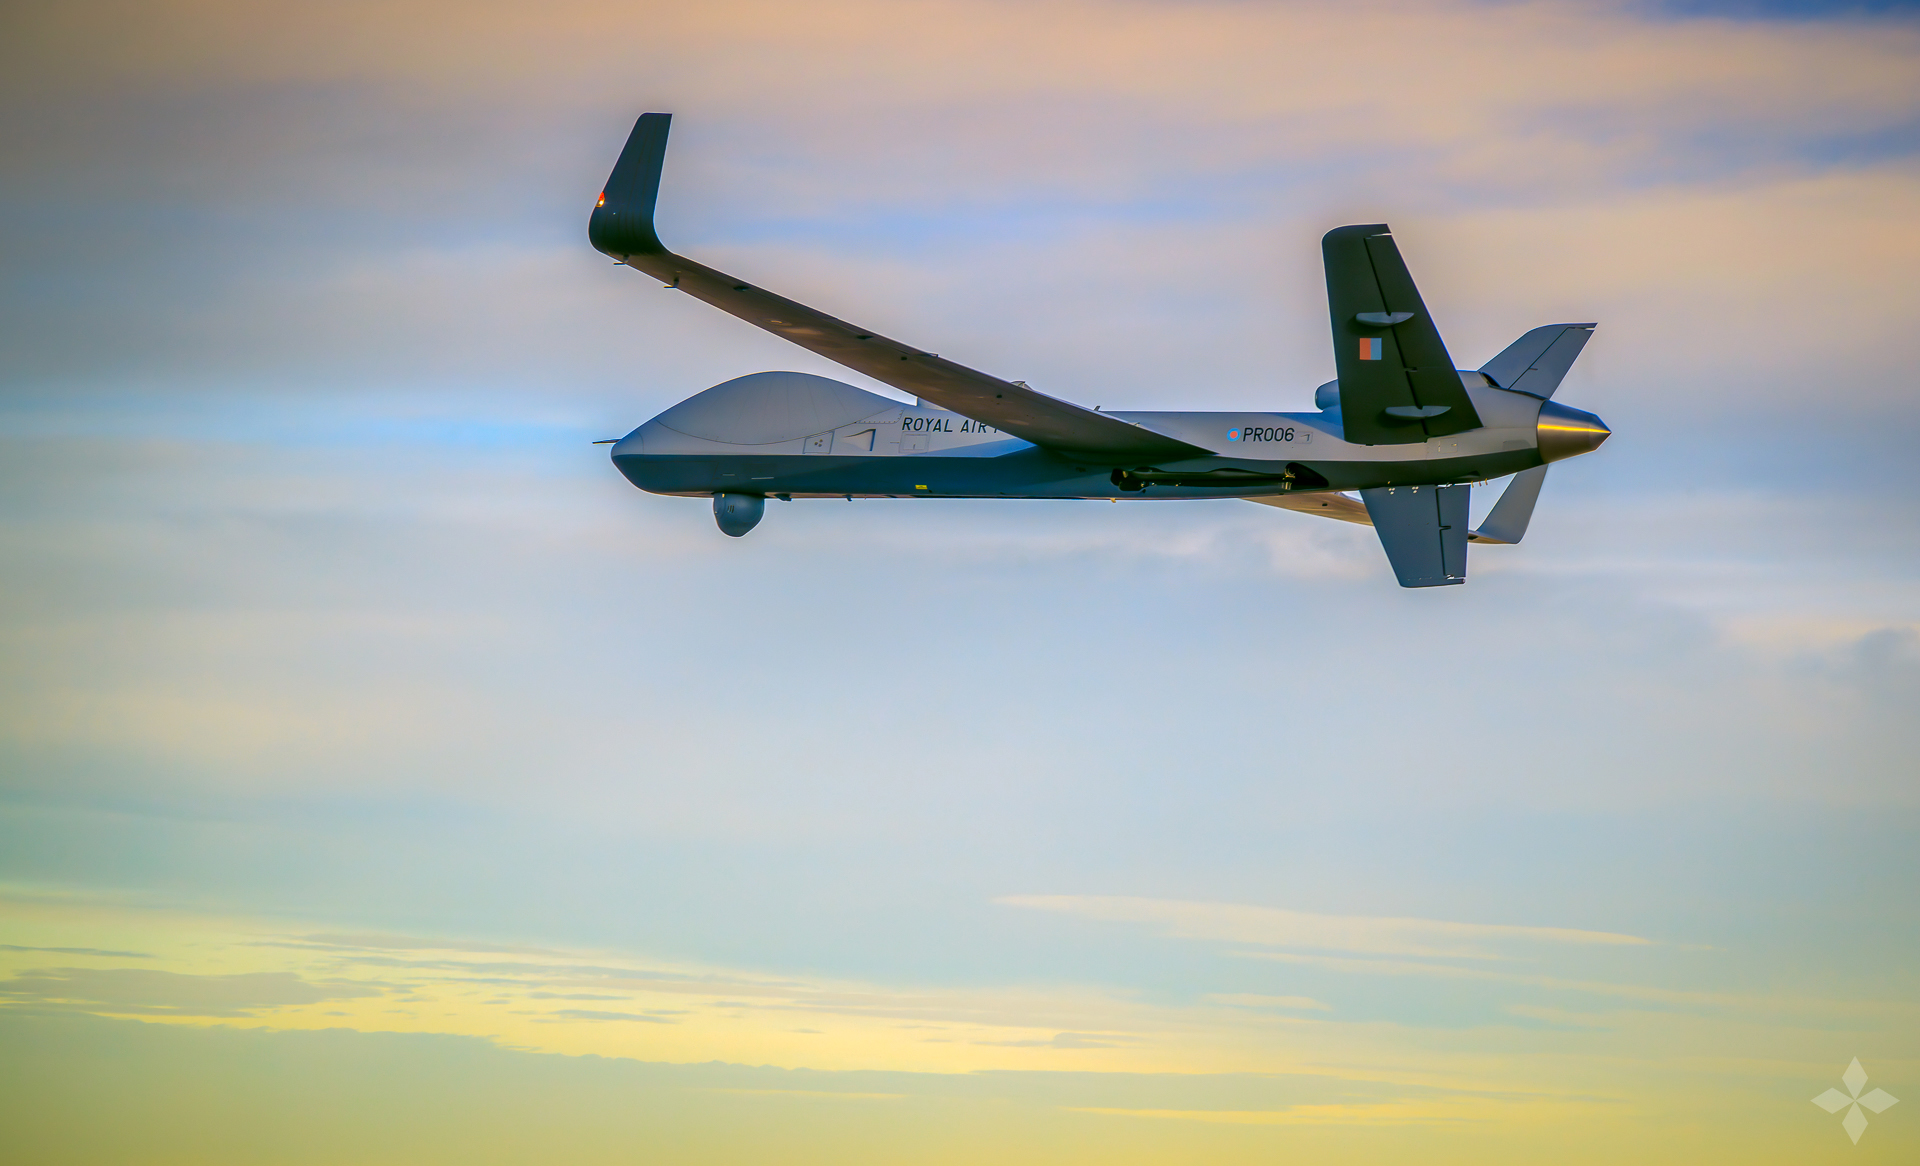 Today’s bold remotely piloted aircraft technologies are shaping an even bolder vision for the future